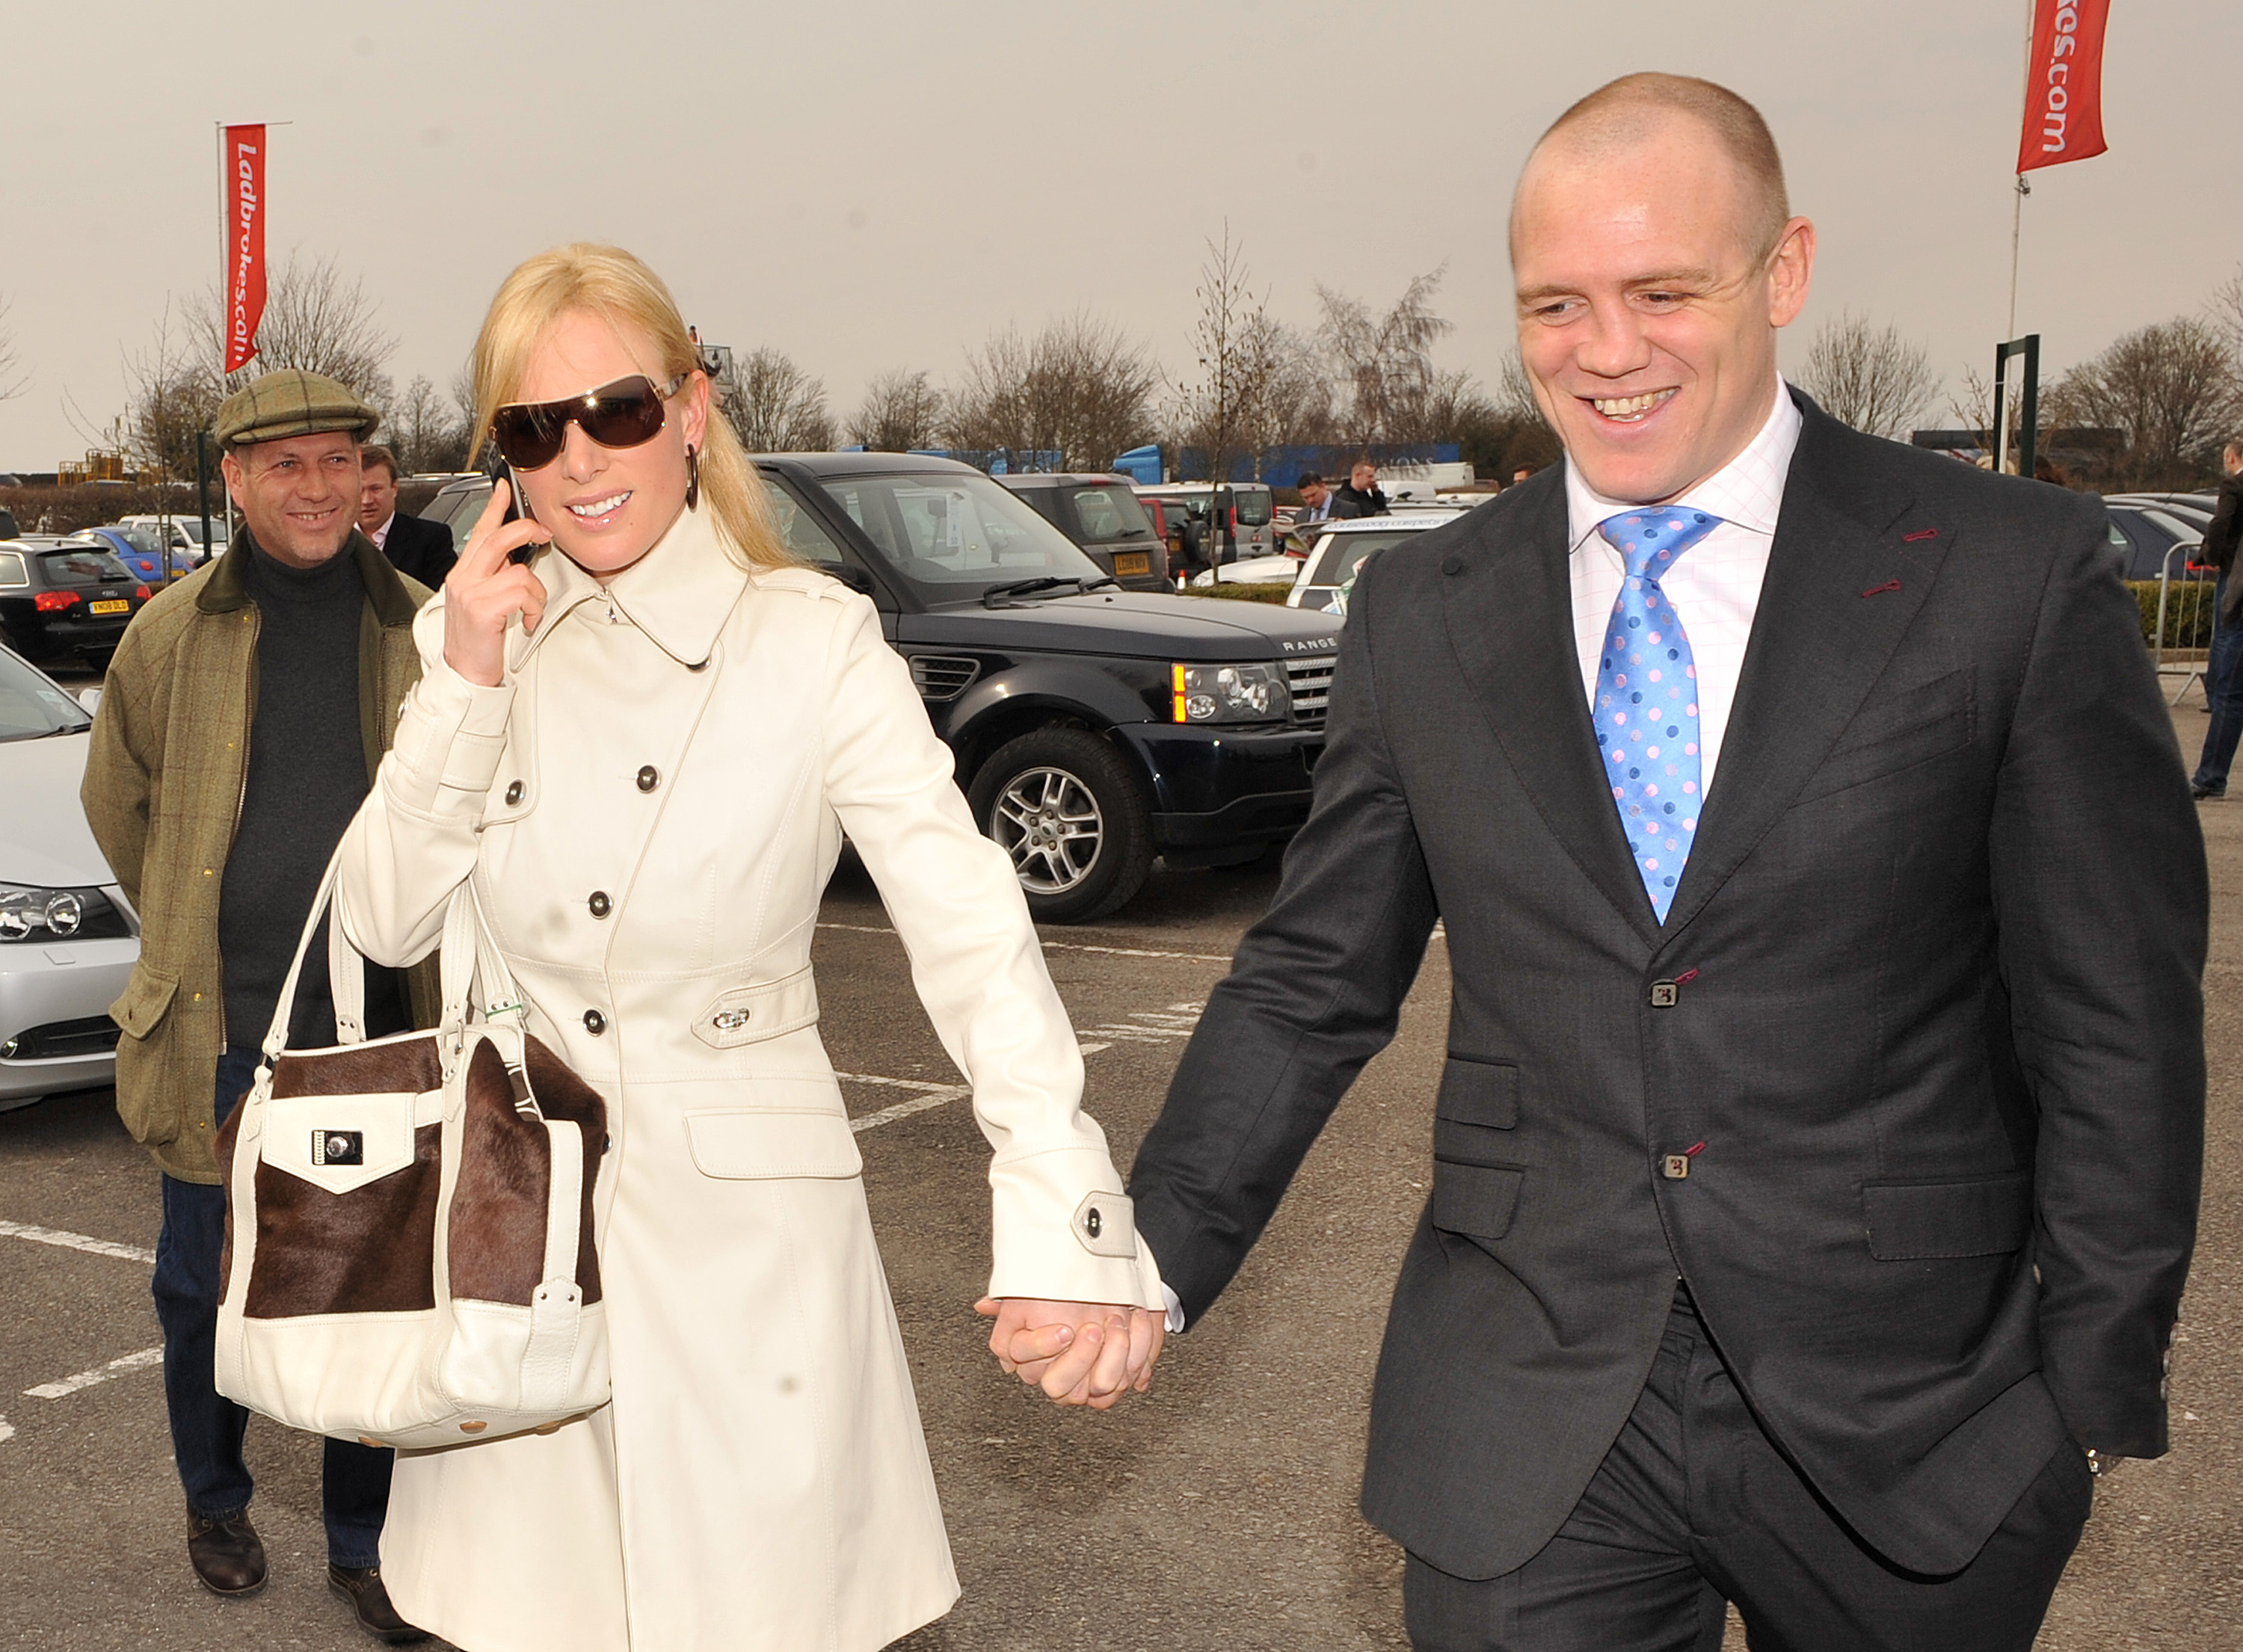 Zara and Mike Tindall hold hands during the Cheltenham Festival.